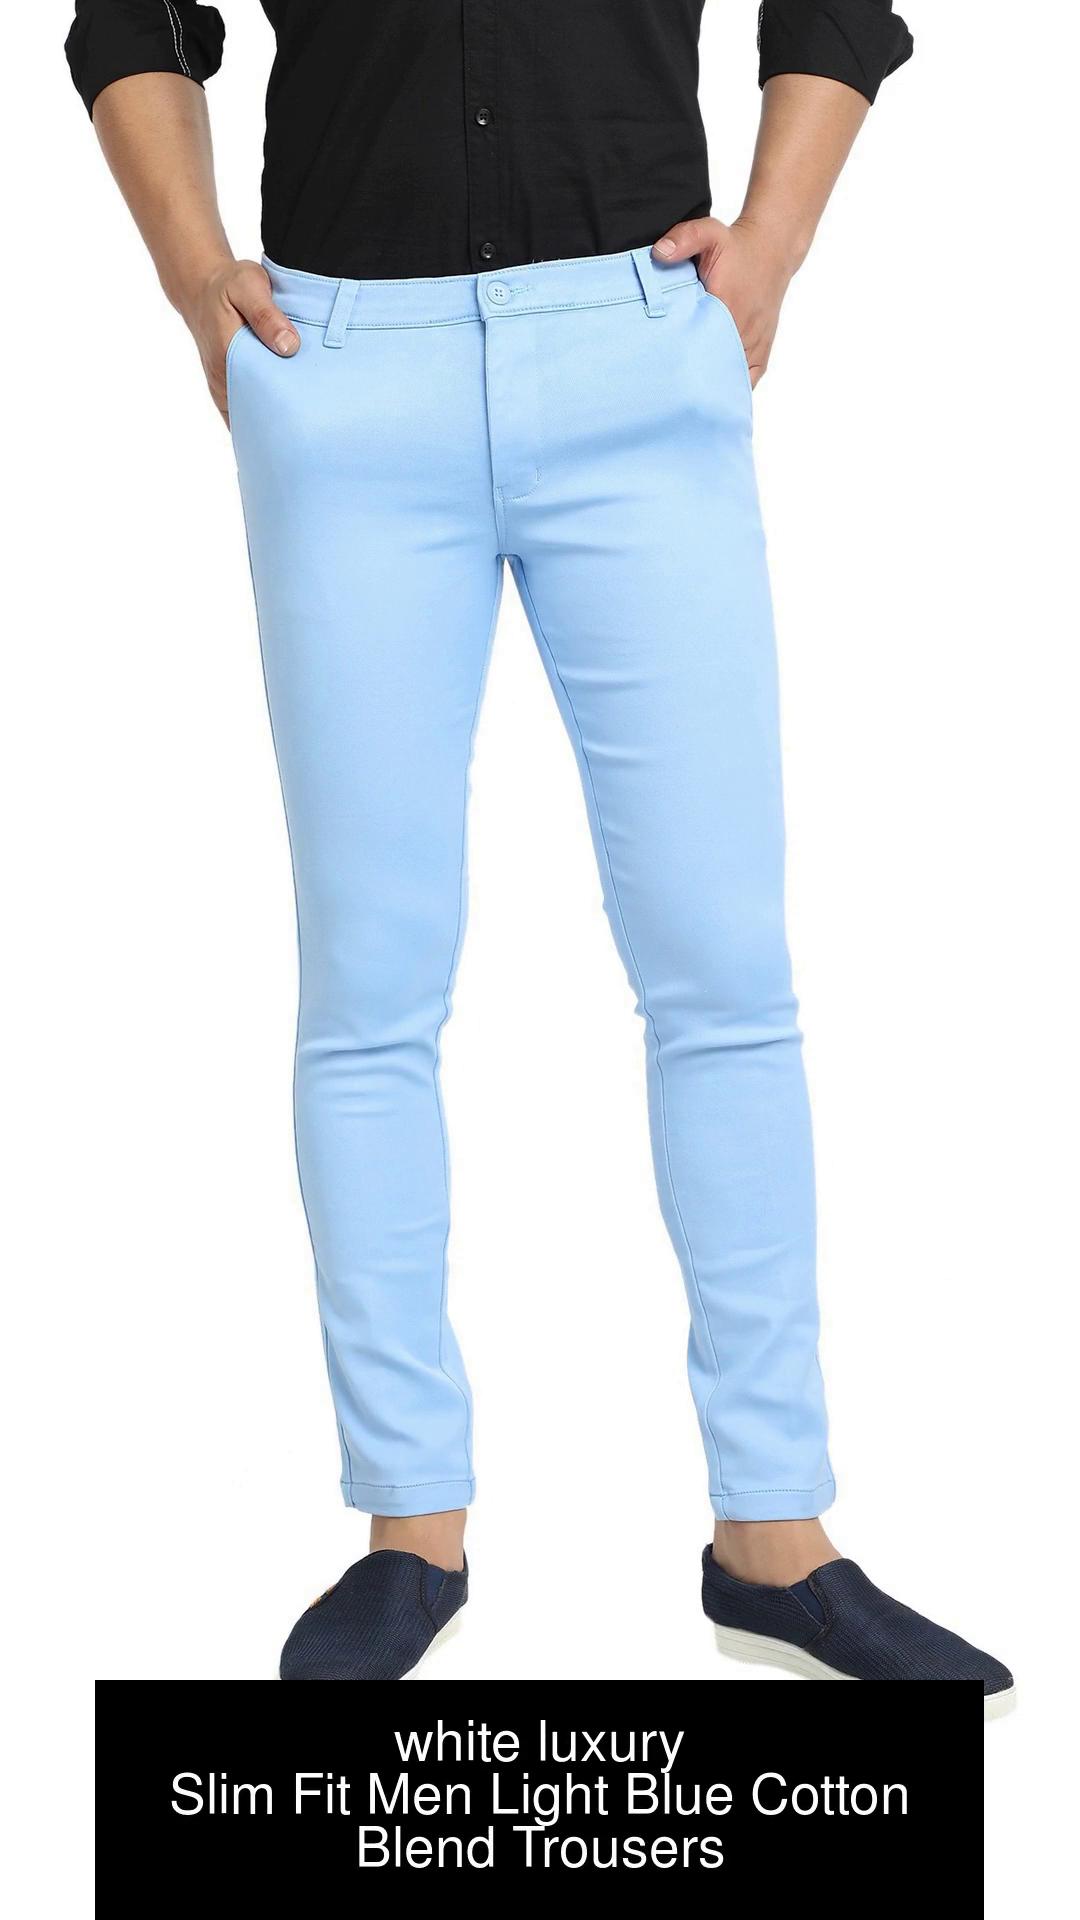 white luxury Slim Fit Men Light Blue Trousers - Buy white luxury Slim Fit  Men Light Blue Trousers Online at Best Prices in India